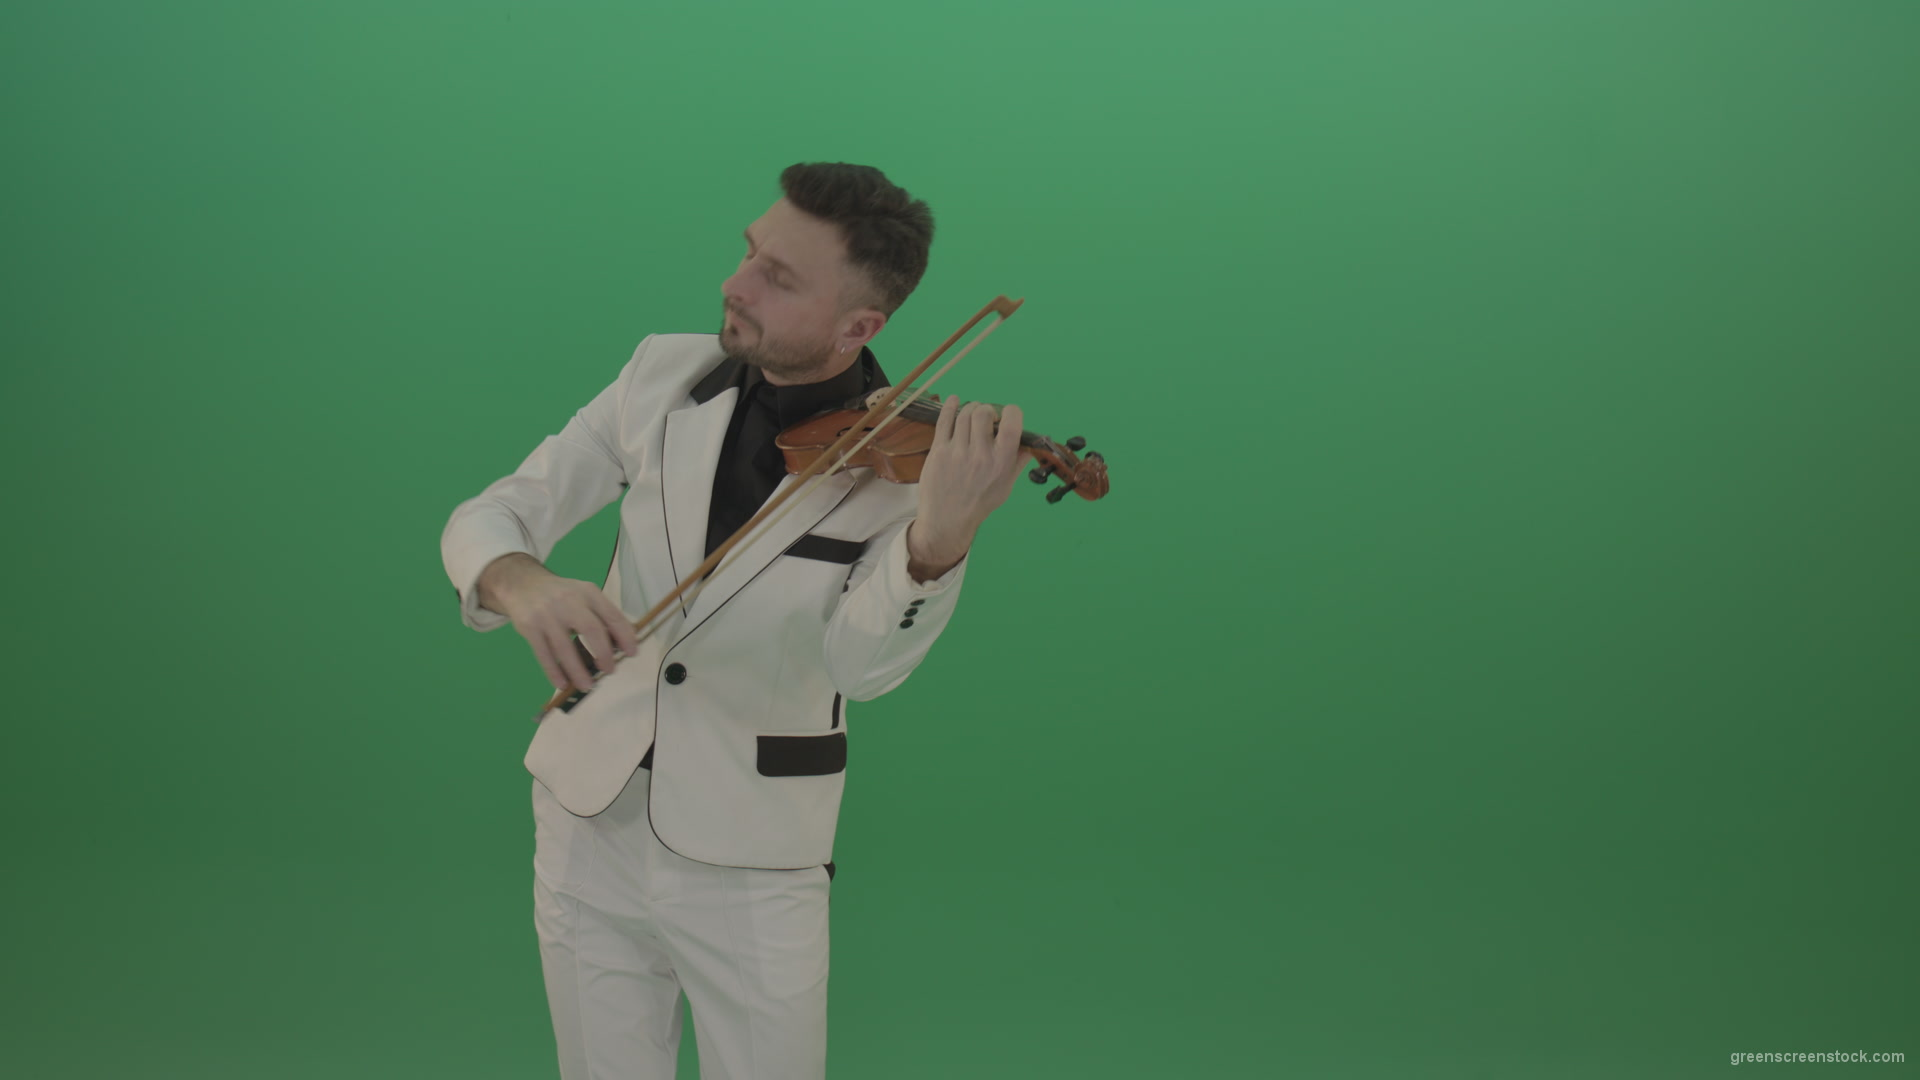 Man-is-playing-slow-love-in-white-costume-on-violin-Fiddle-string-music-instrument-isolated-on-green-screen_009 Green Screen Stock